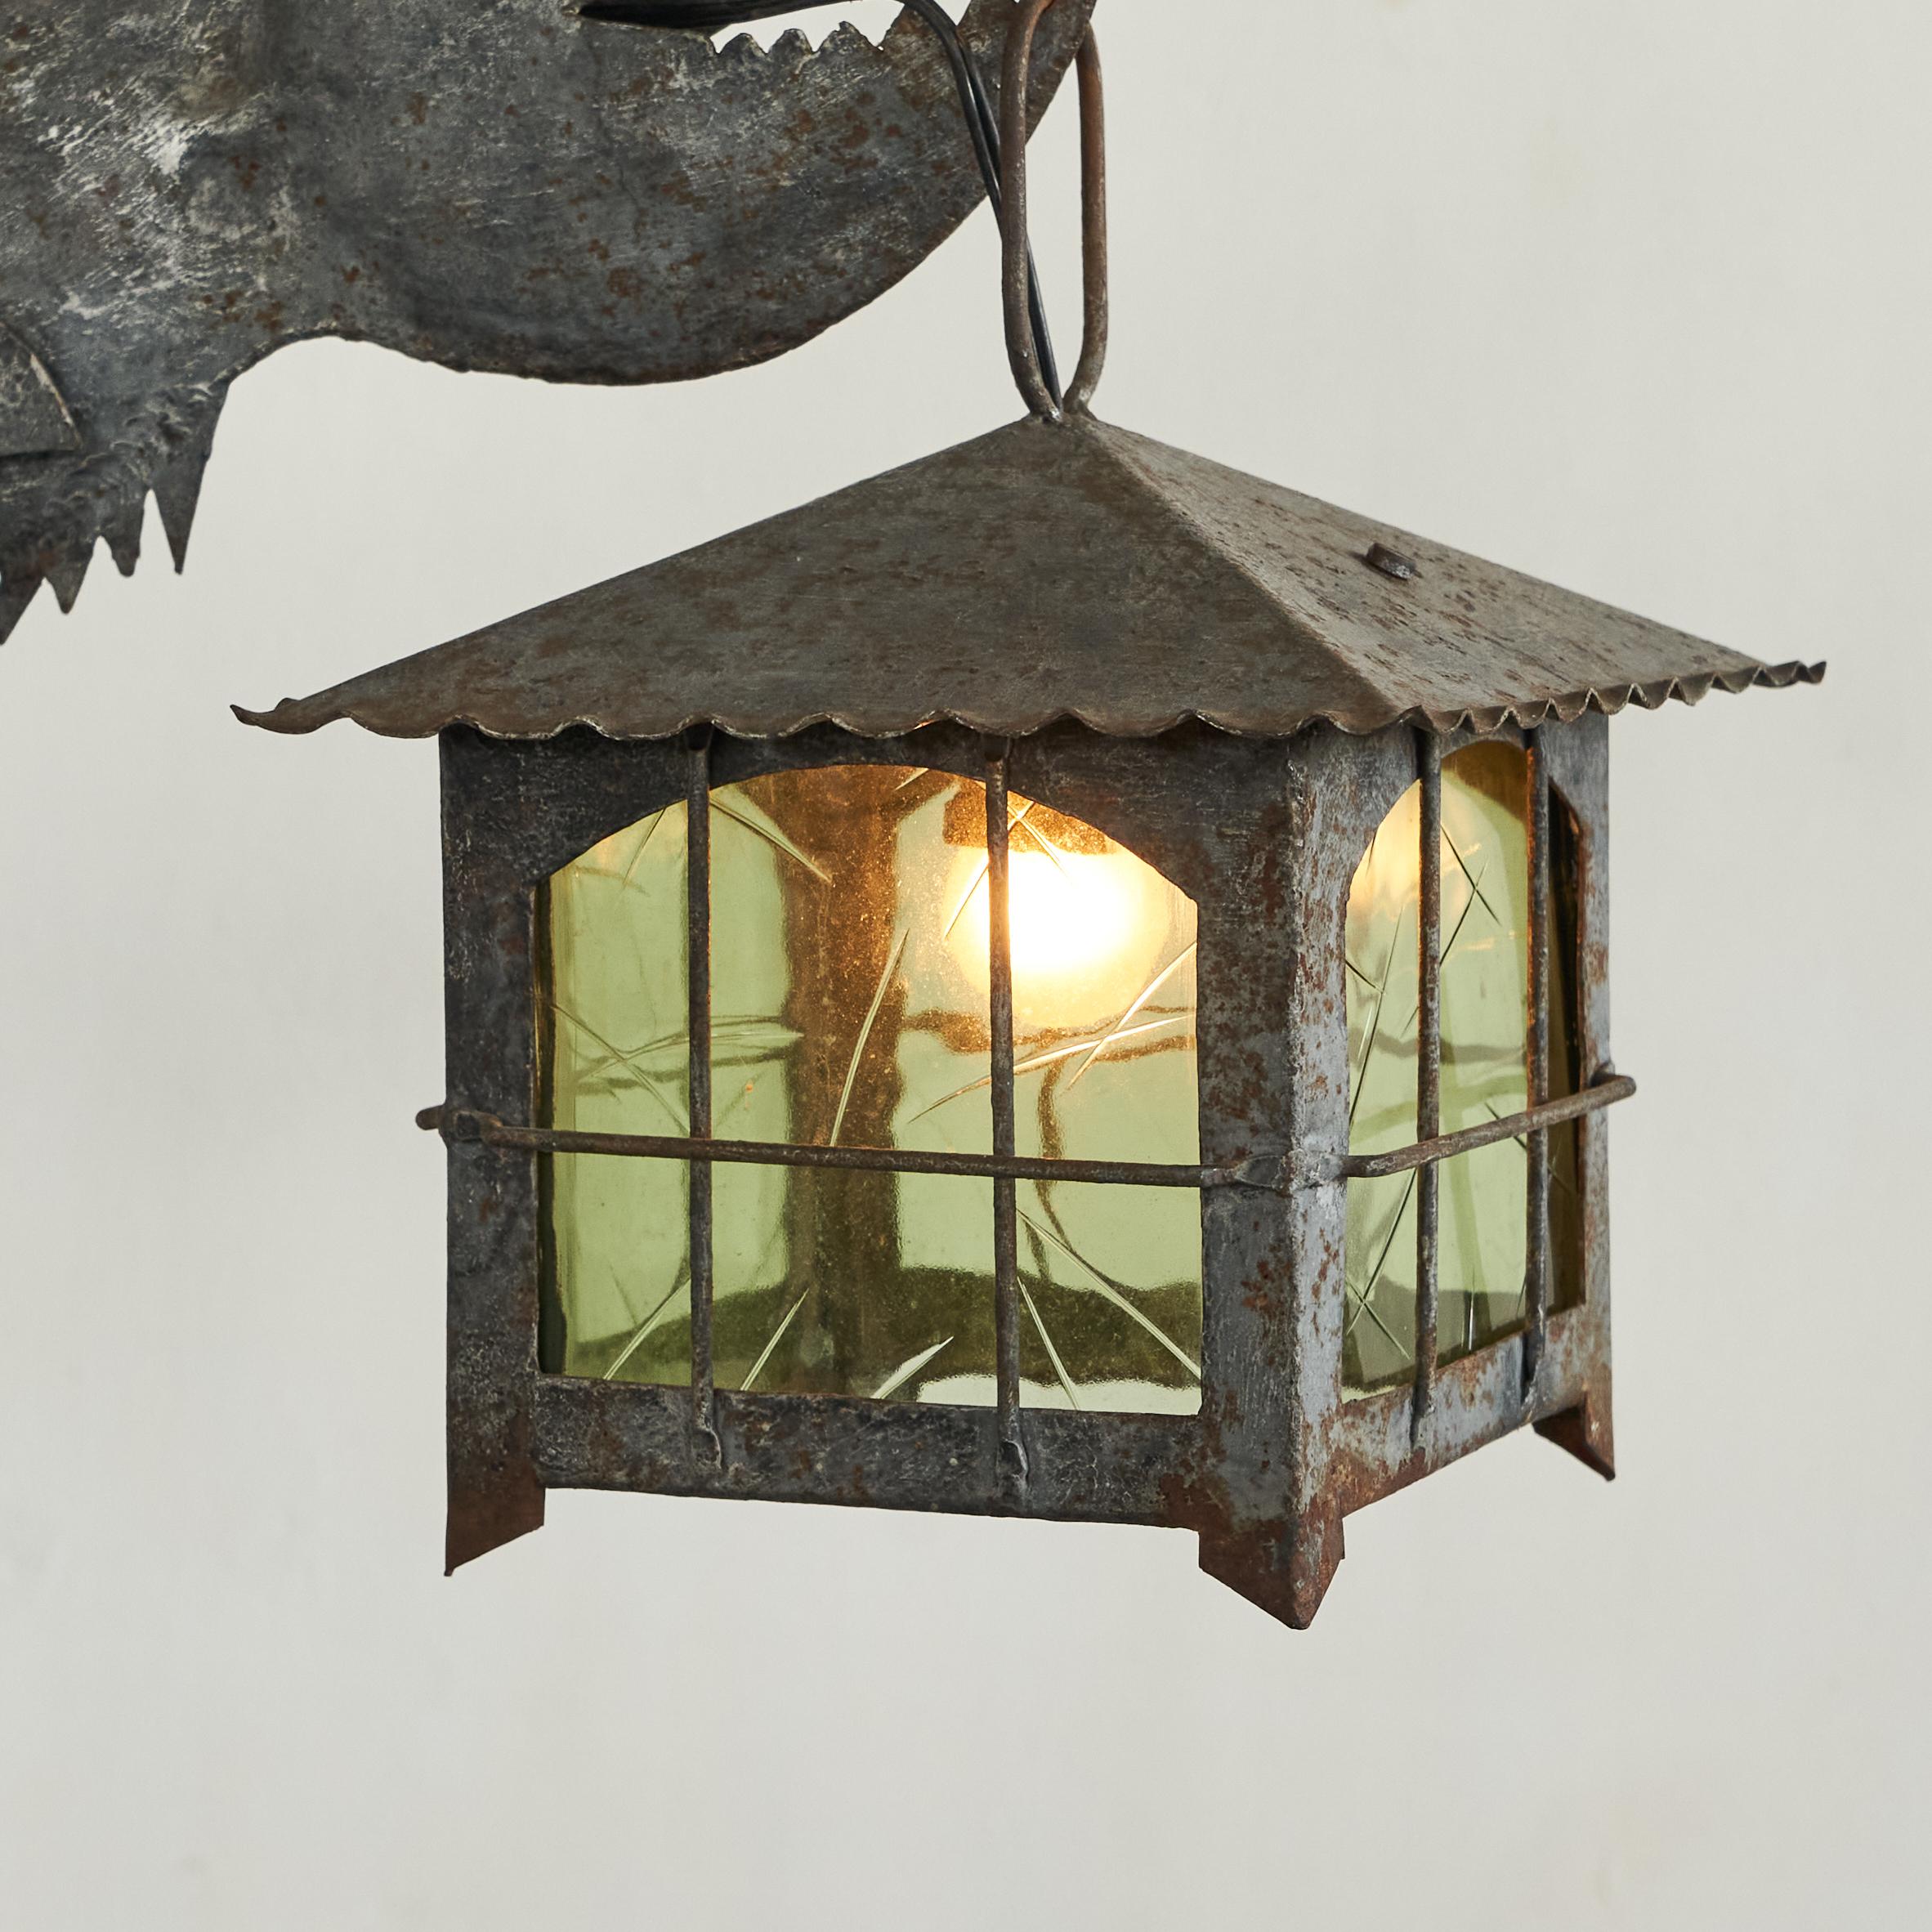 20th Century Whimsical and Unique Brutalist Fish Lantern Floor Lamp in Wrought Iron 1960s For Sale